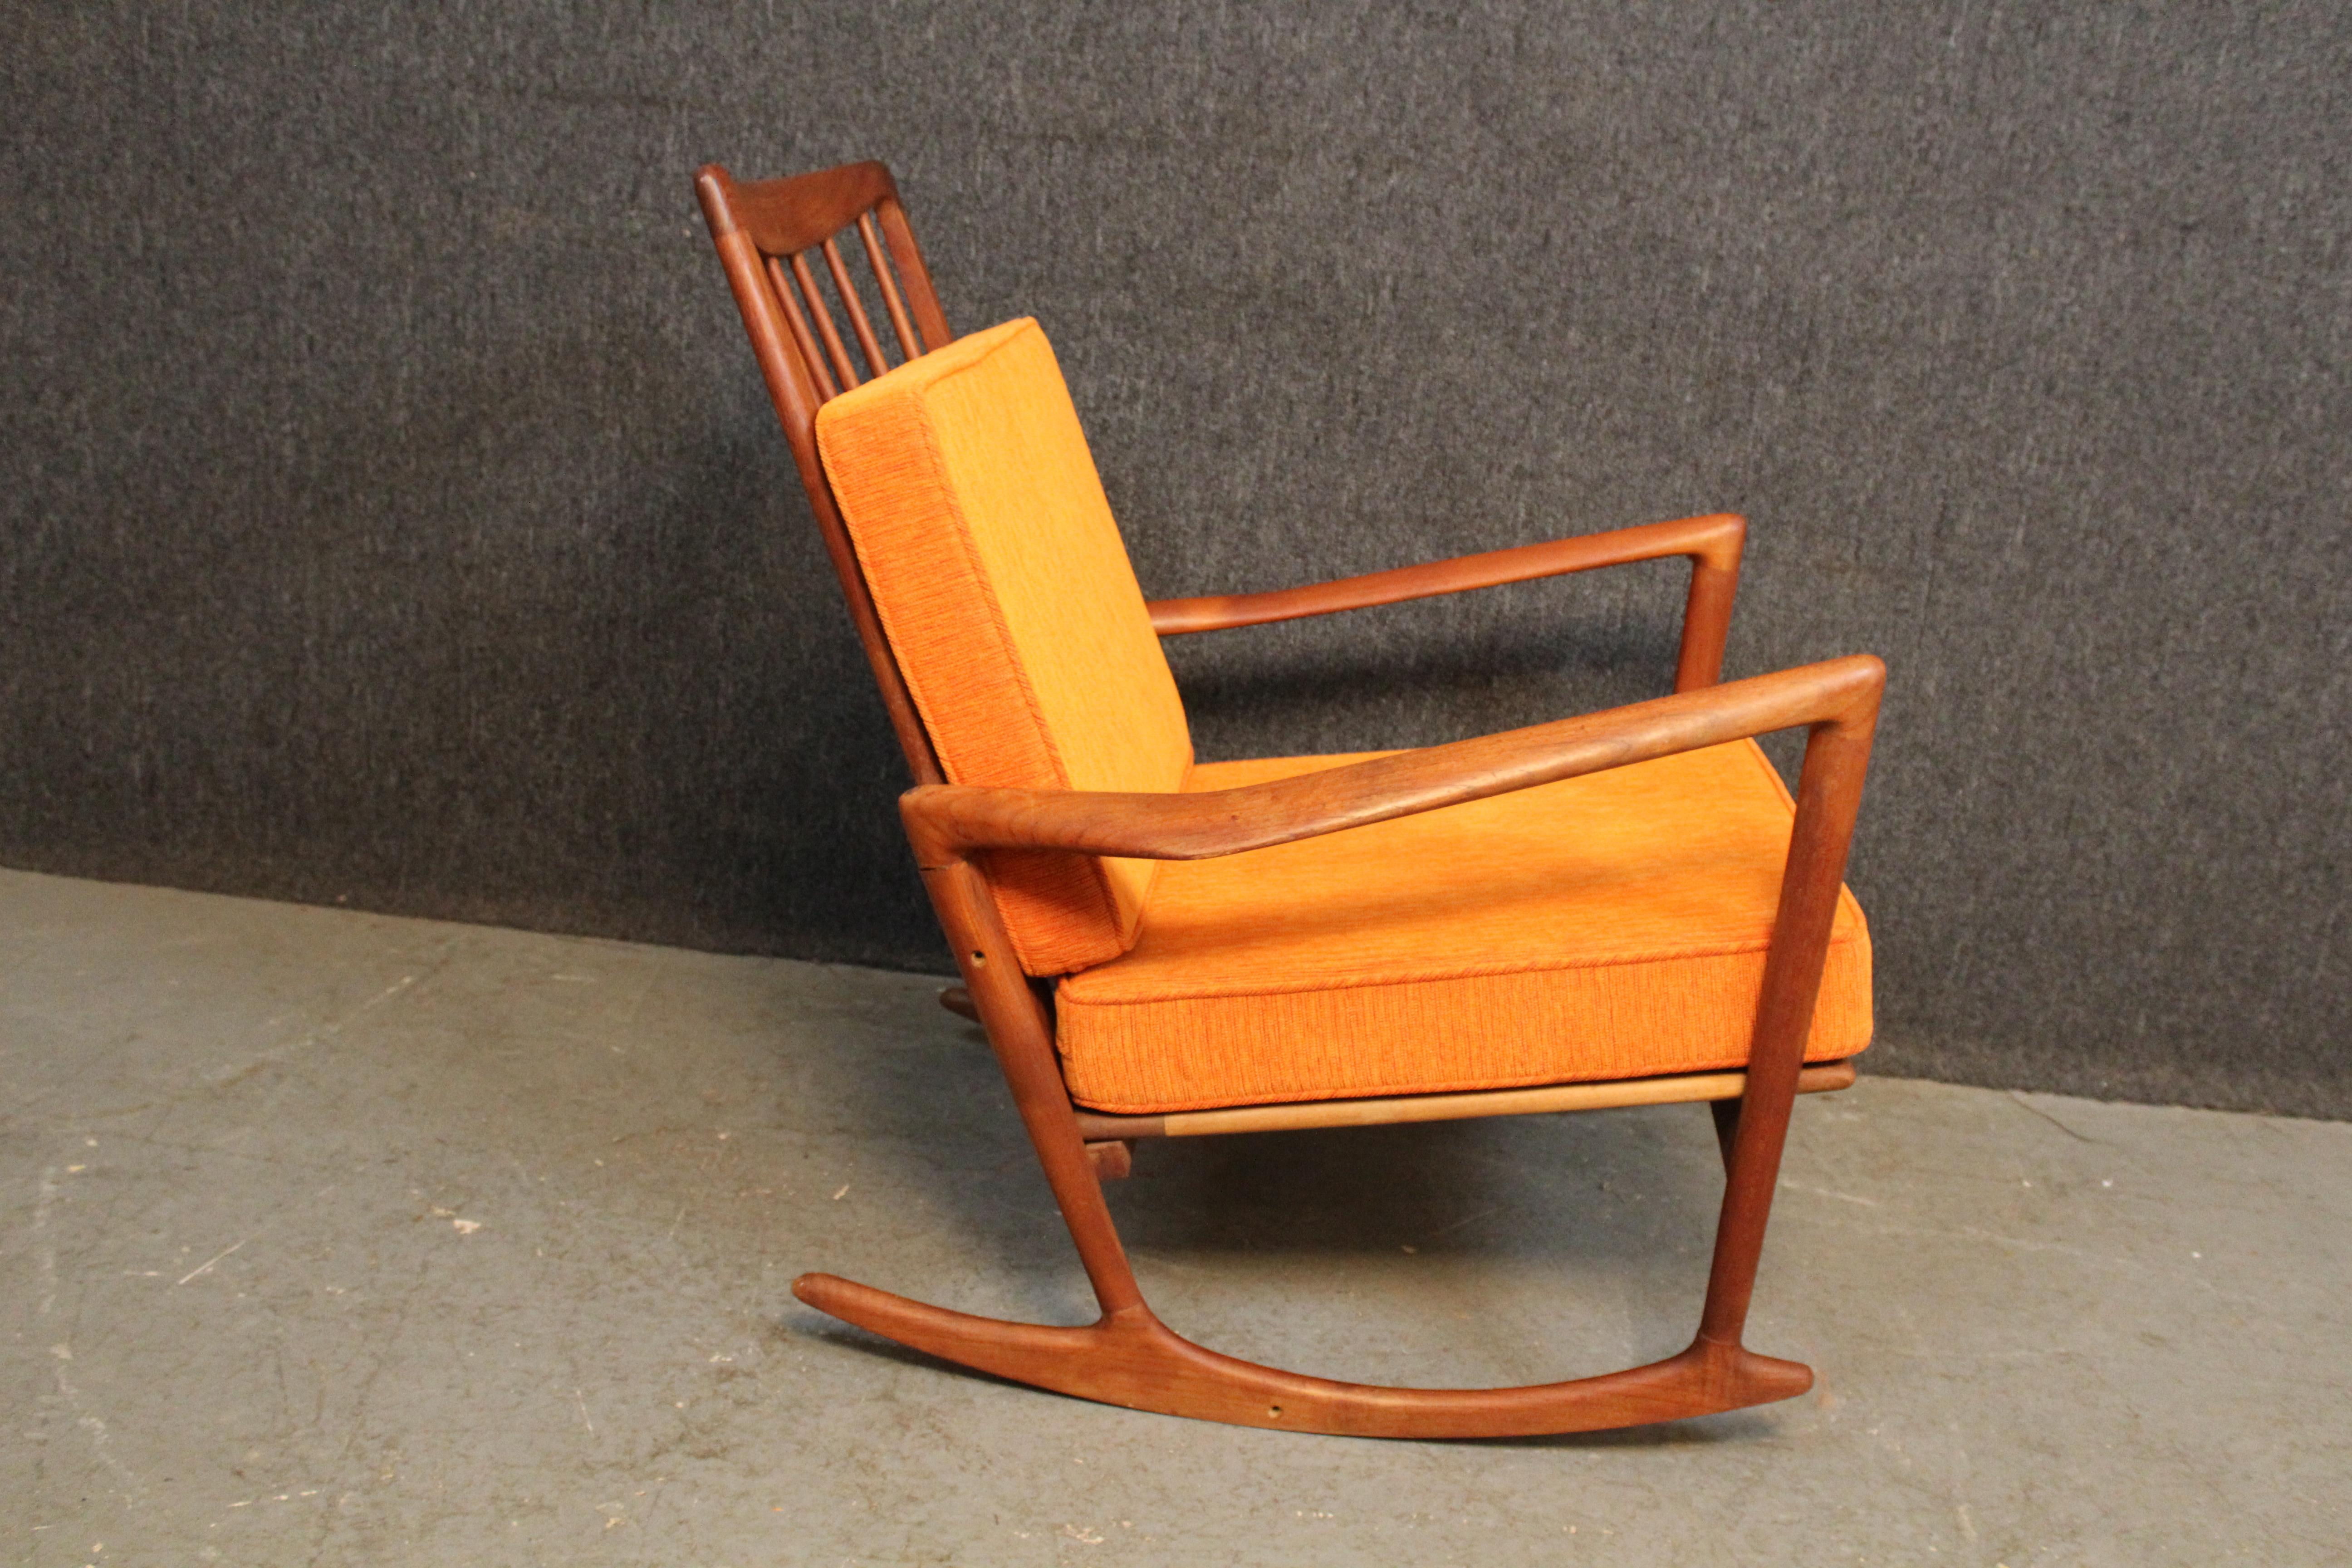 20th Century Vintage Sculptural Rocking Chair by Ib Kofod-Larsen for Selig Denmark For Sale